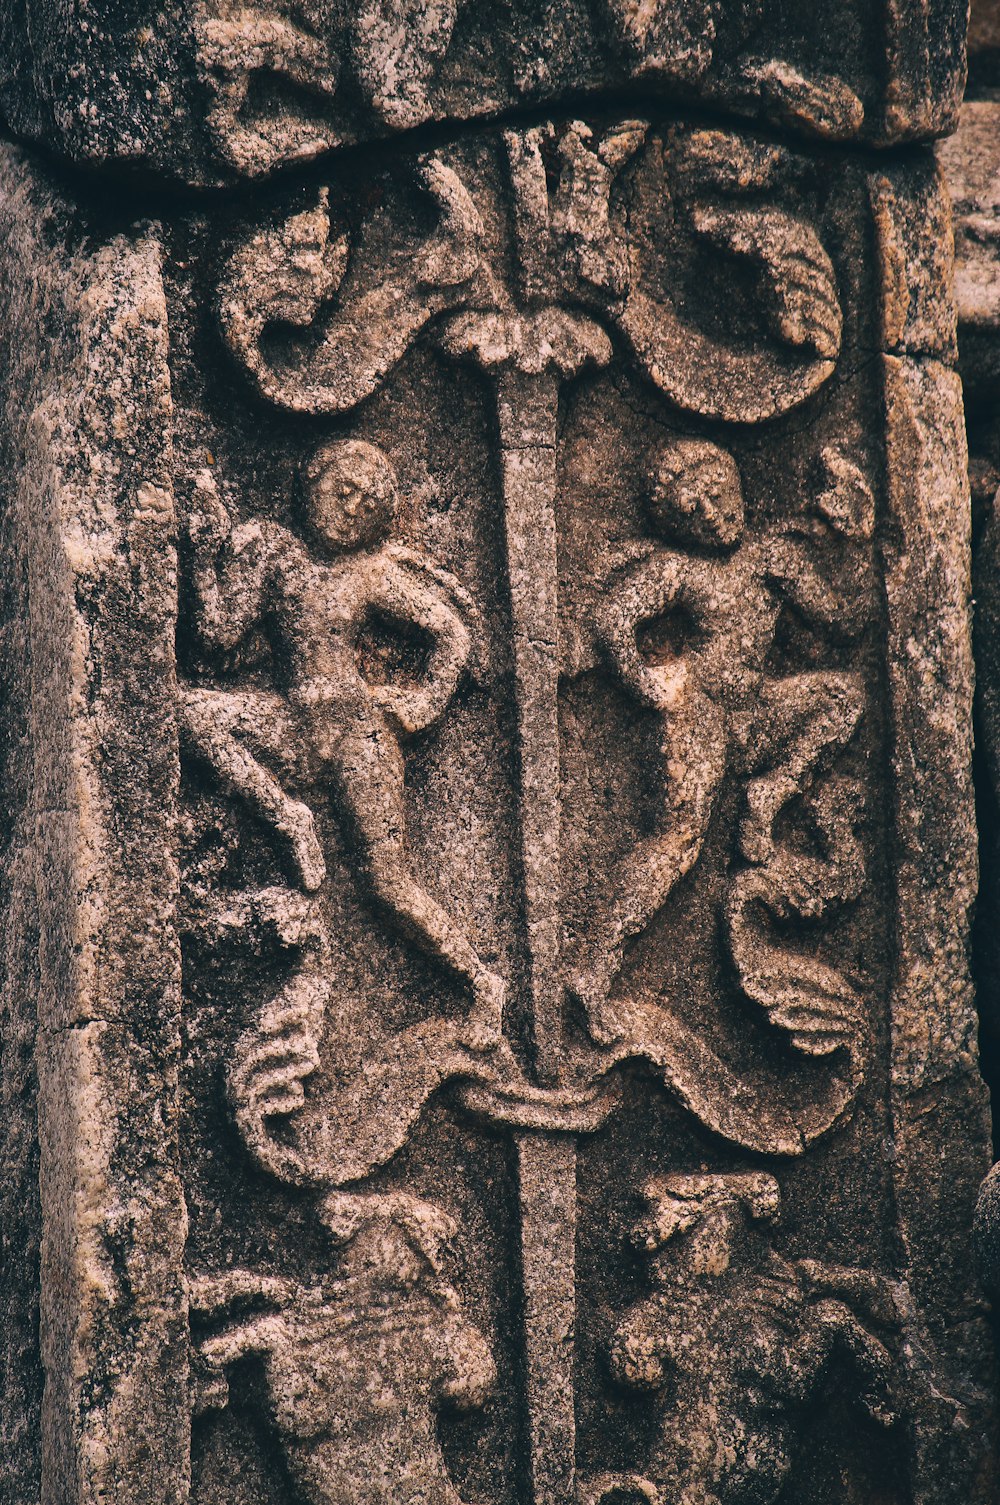 a close-up of a stone carving